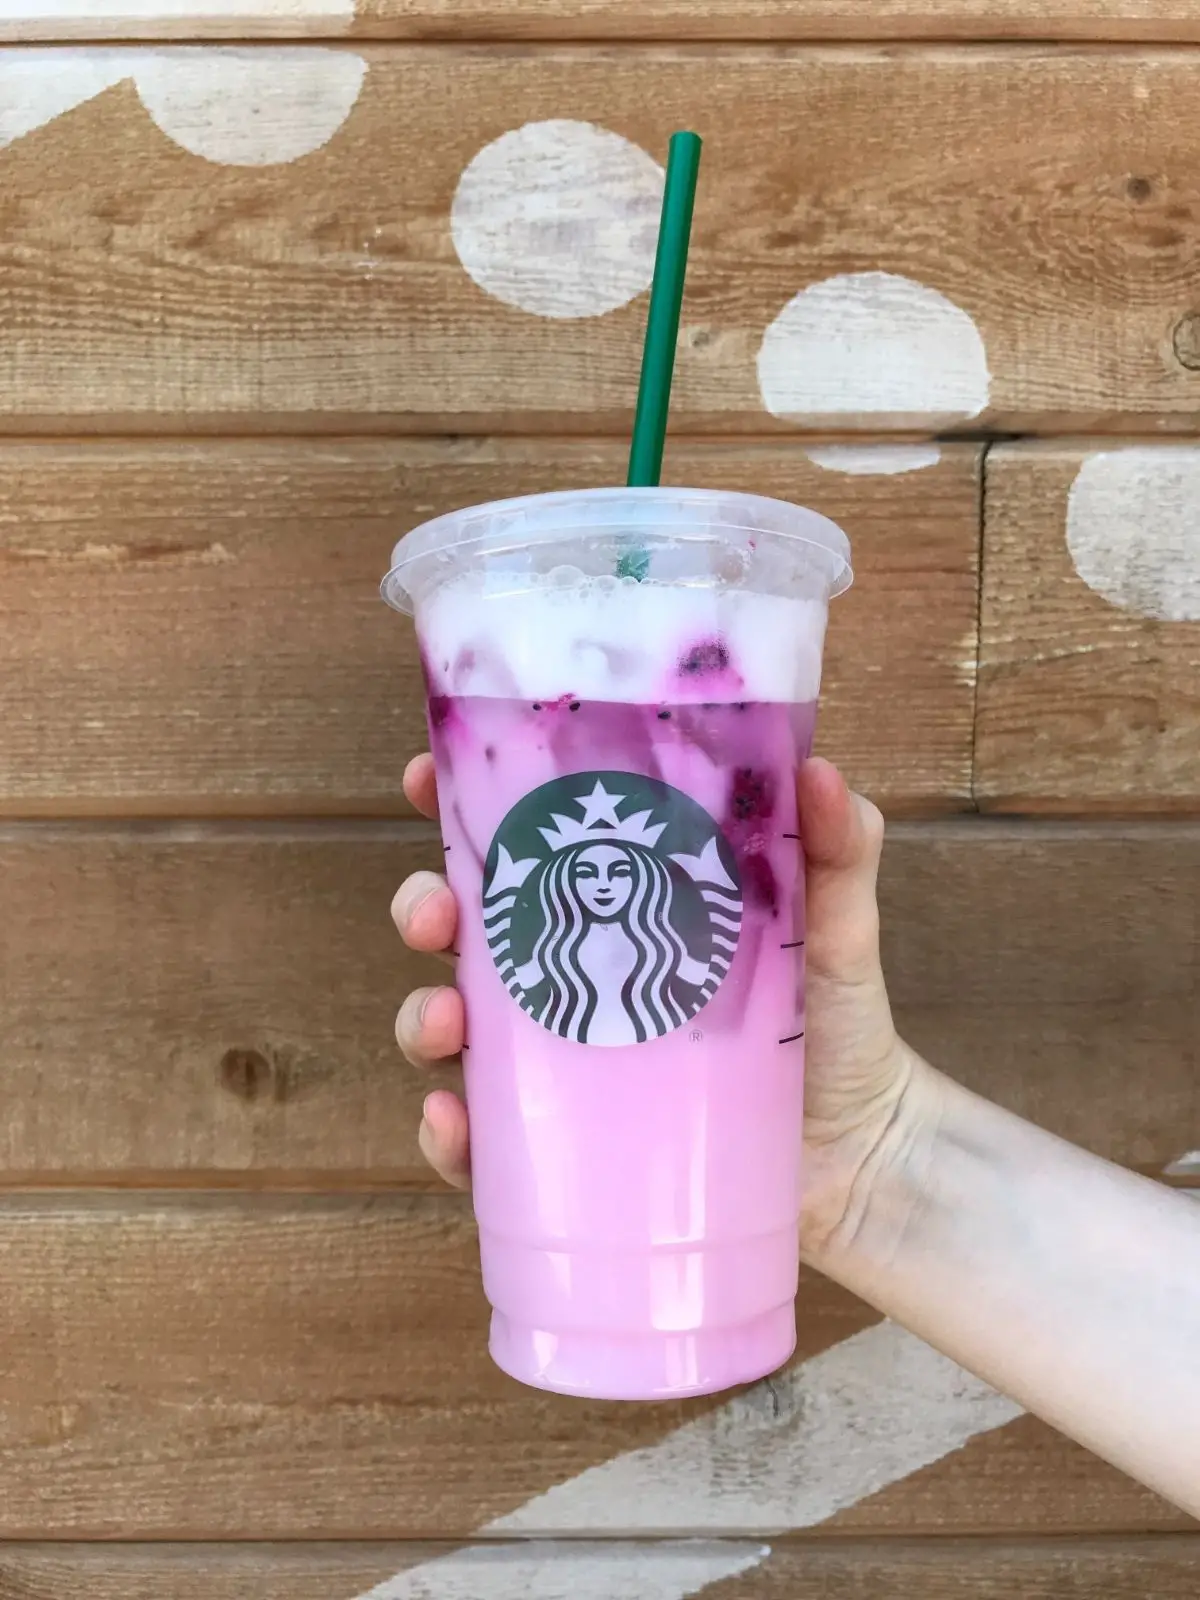 the dragon drink from starbucks with a wood wall background